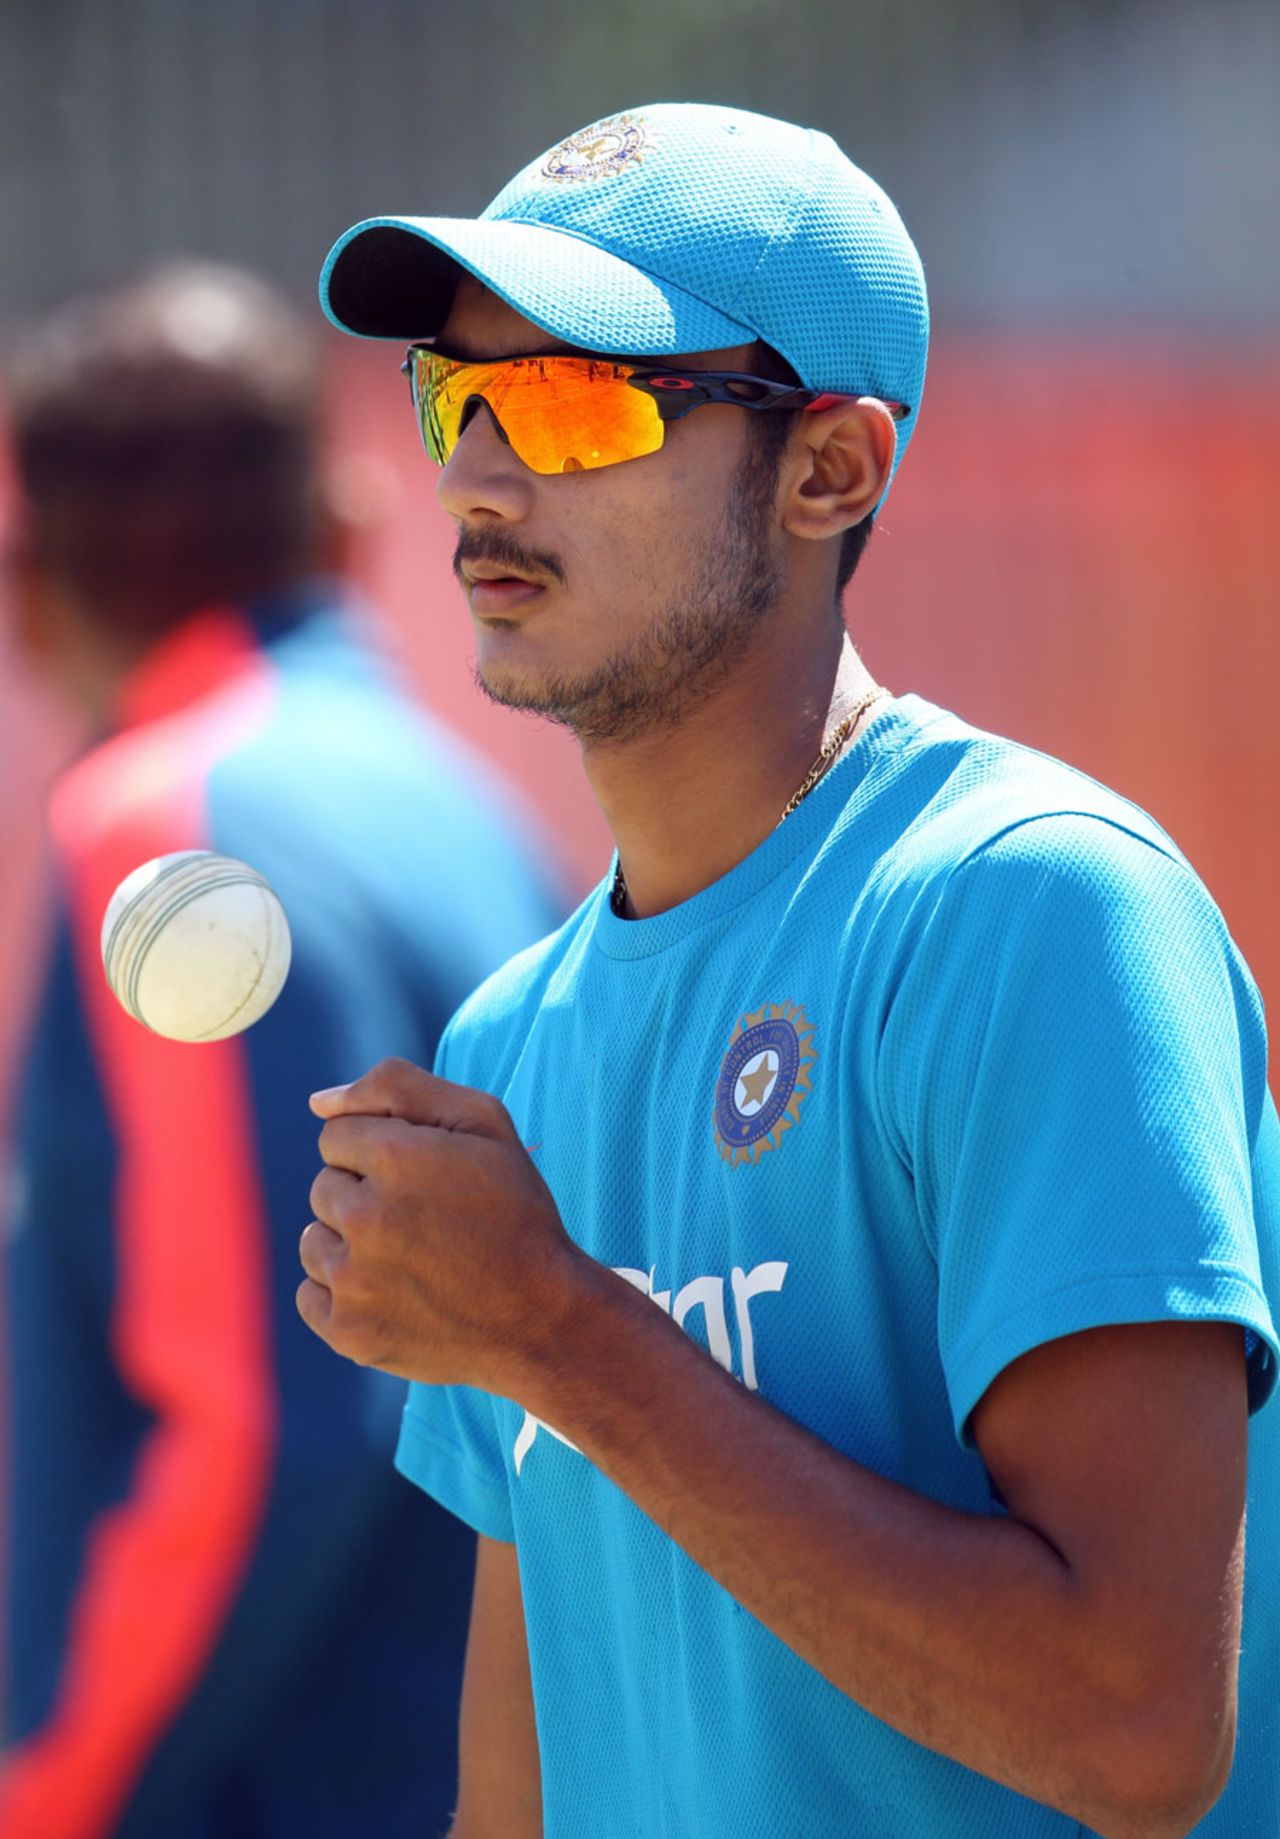 Axar Patel gets ready to bowl during India's practice session on the eve of the game against Zimbabwe, World Cup 2015, Auckland, March 13, 2015